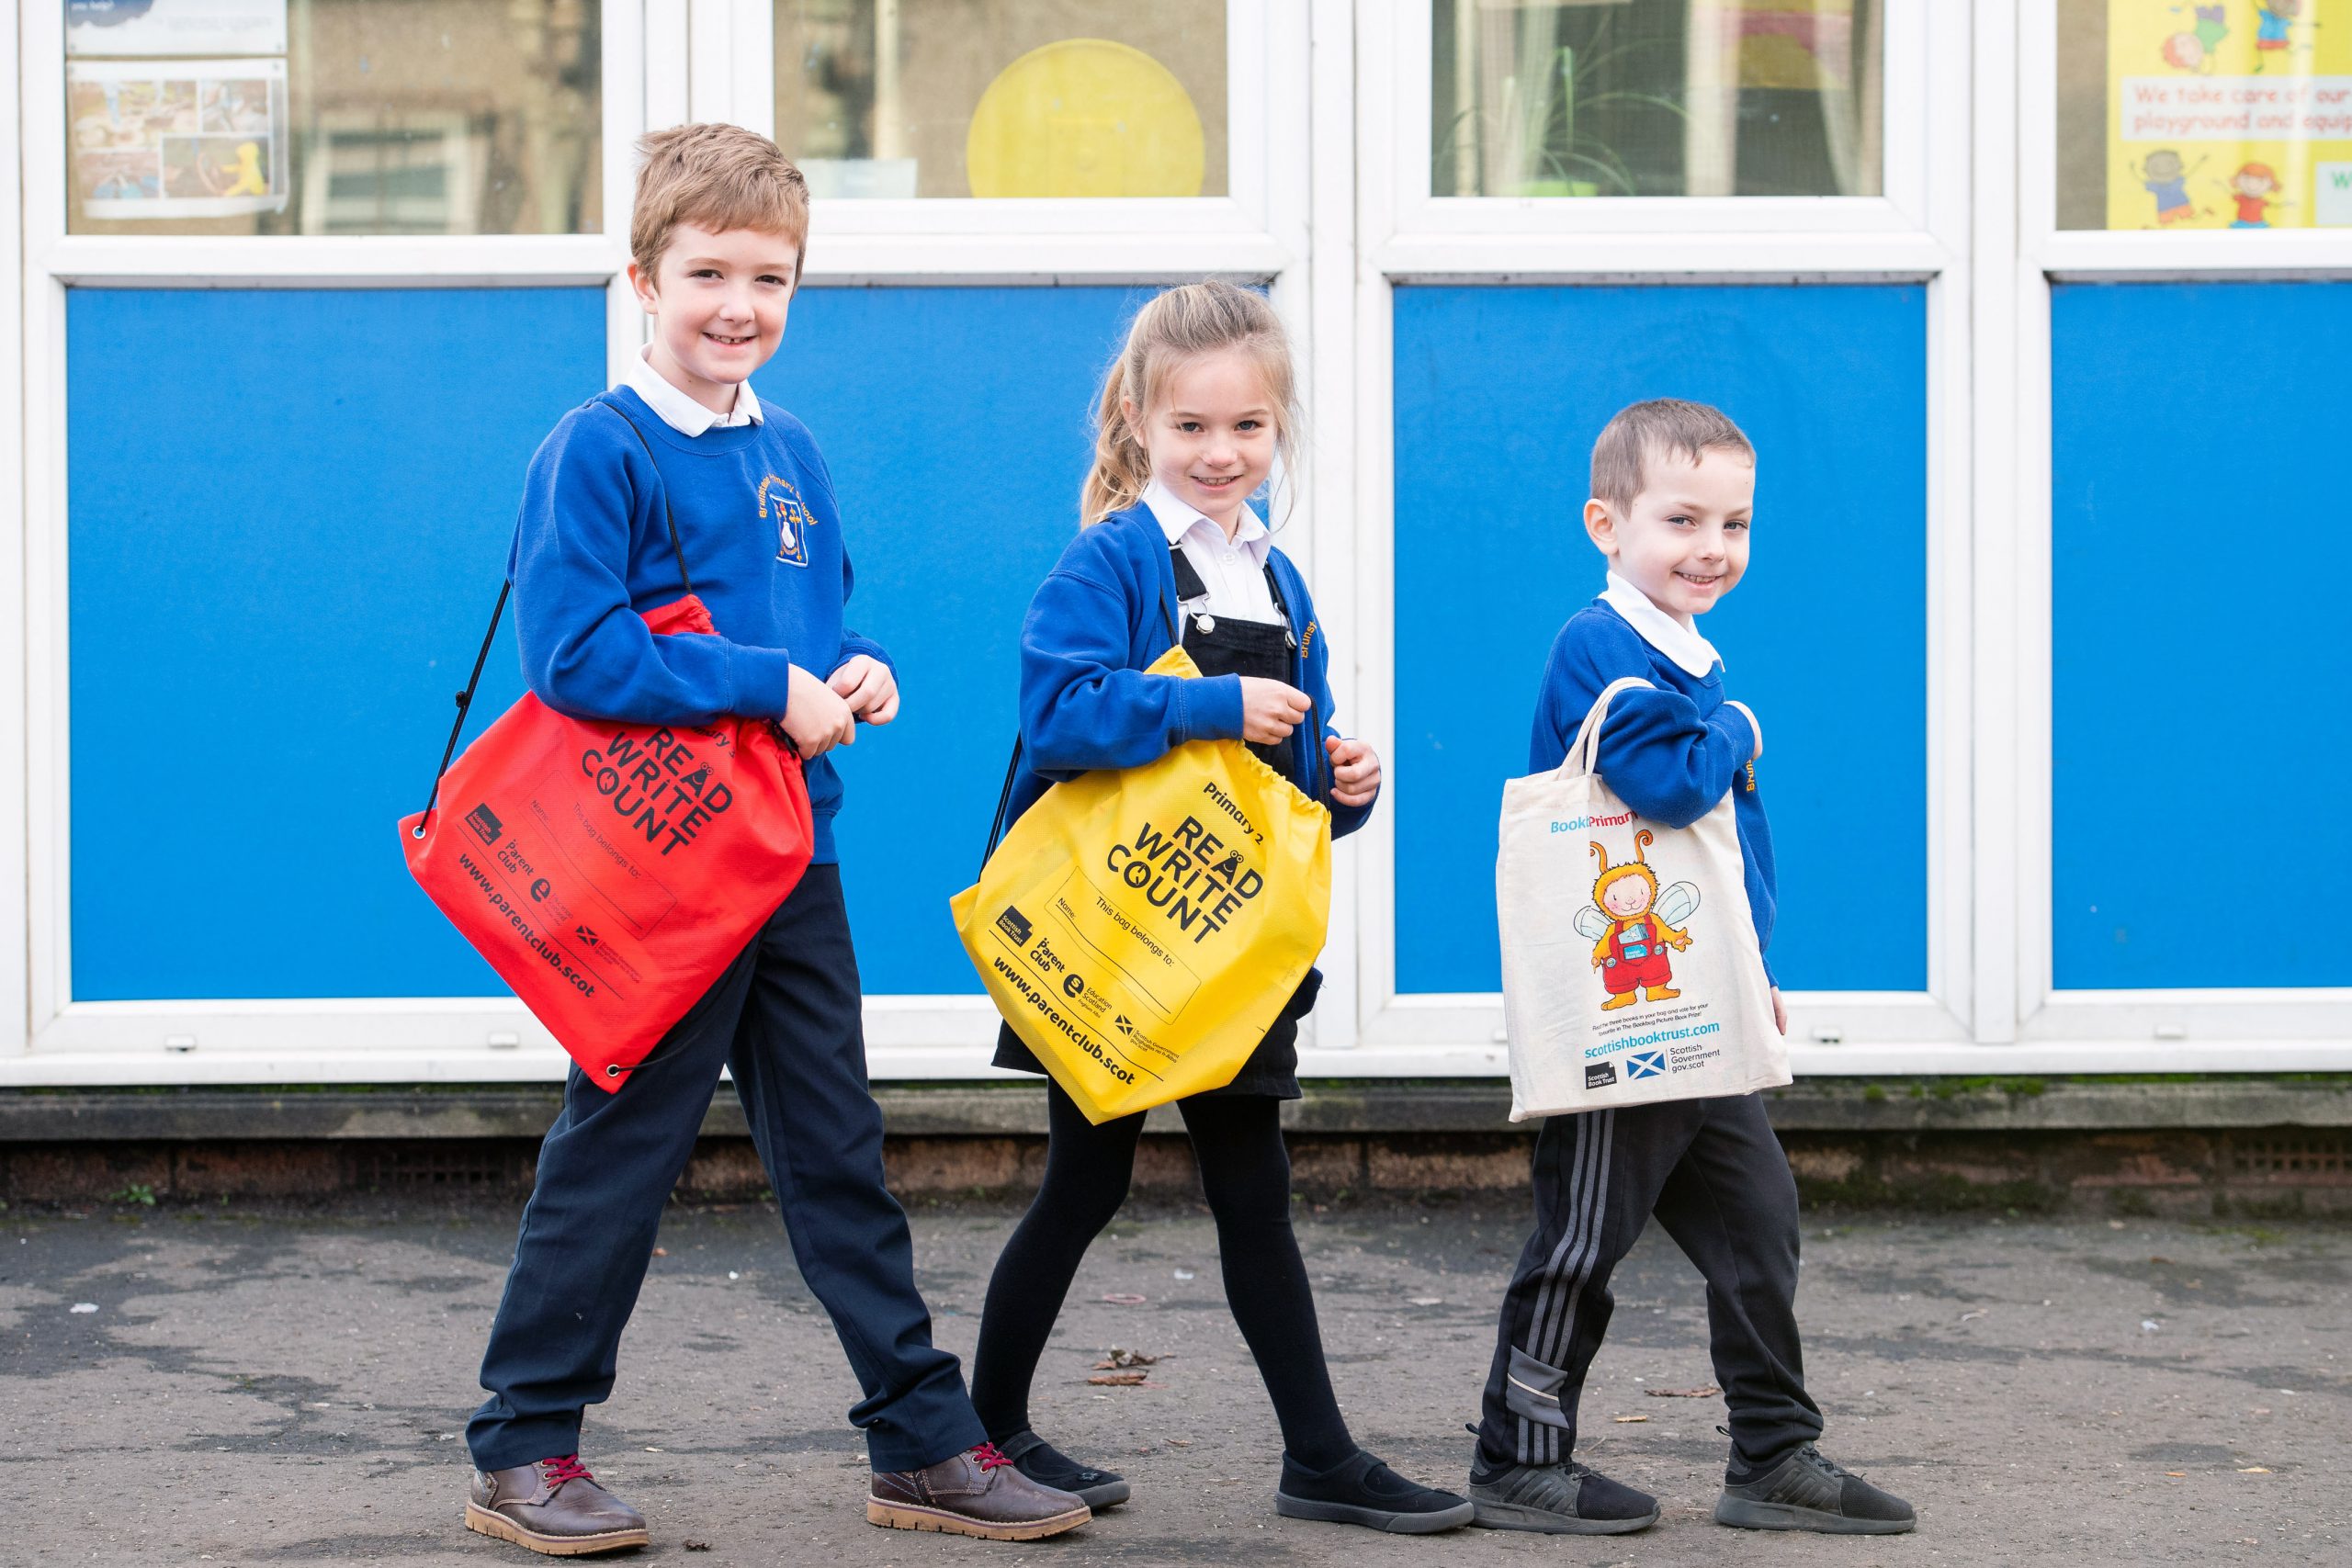 Three primary school children carrying book bags stand outside their school